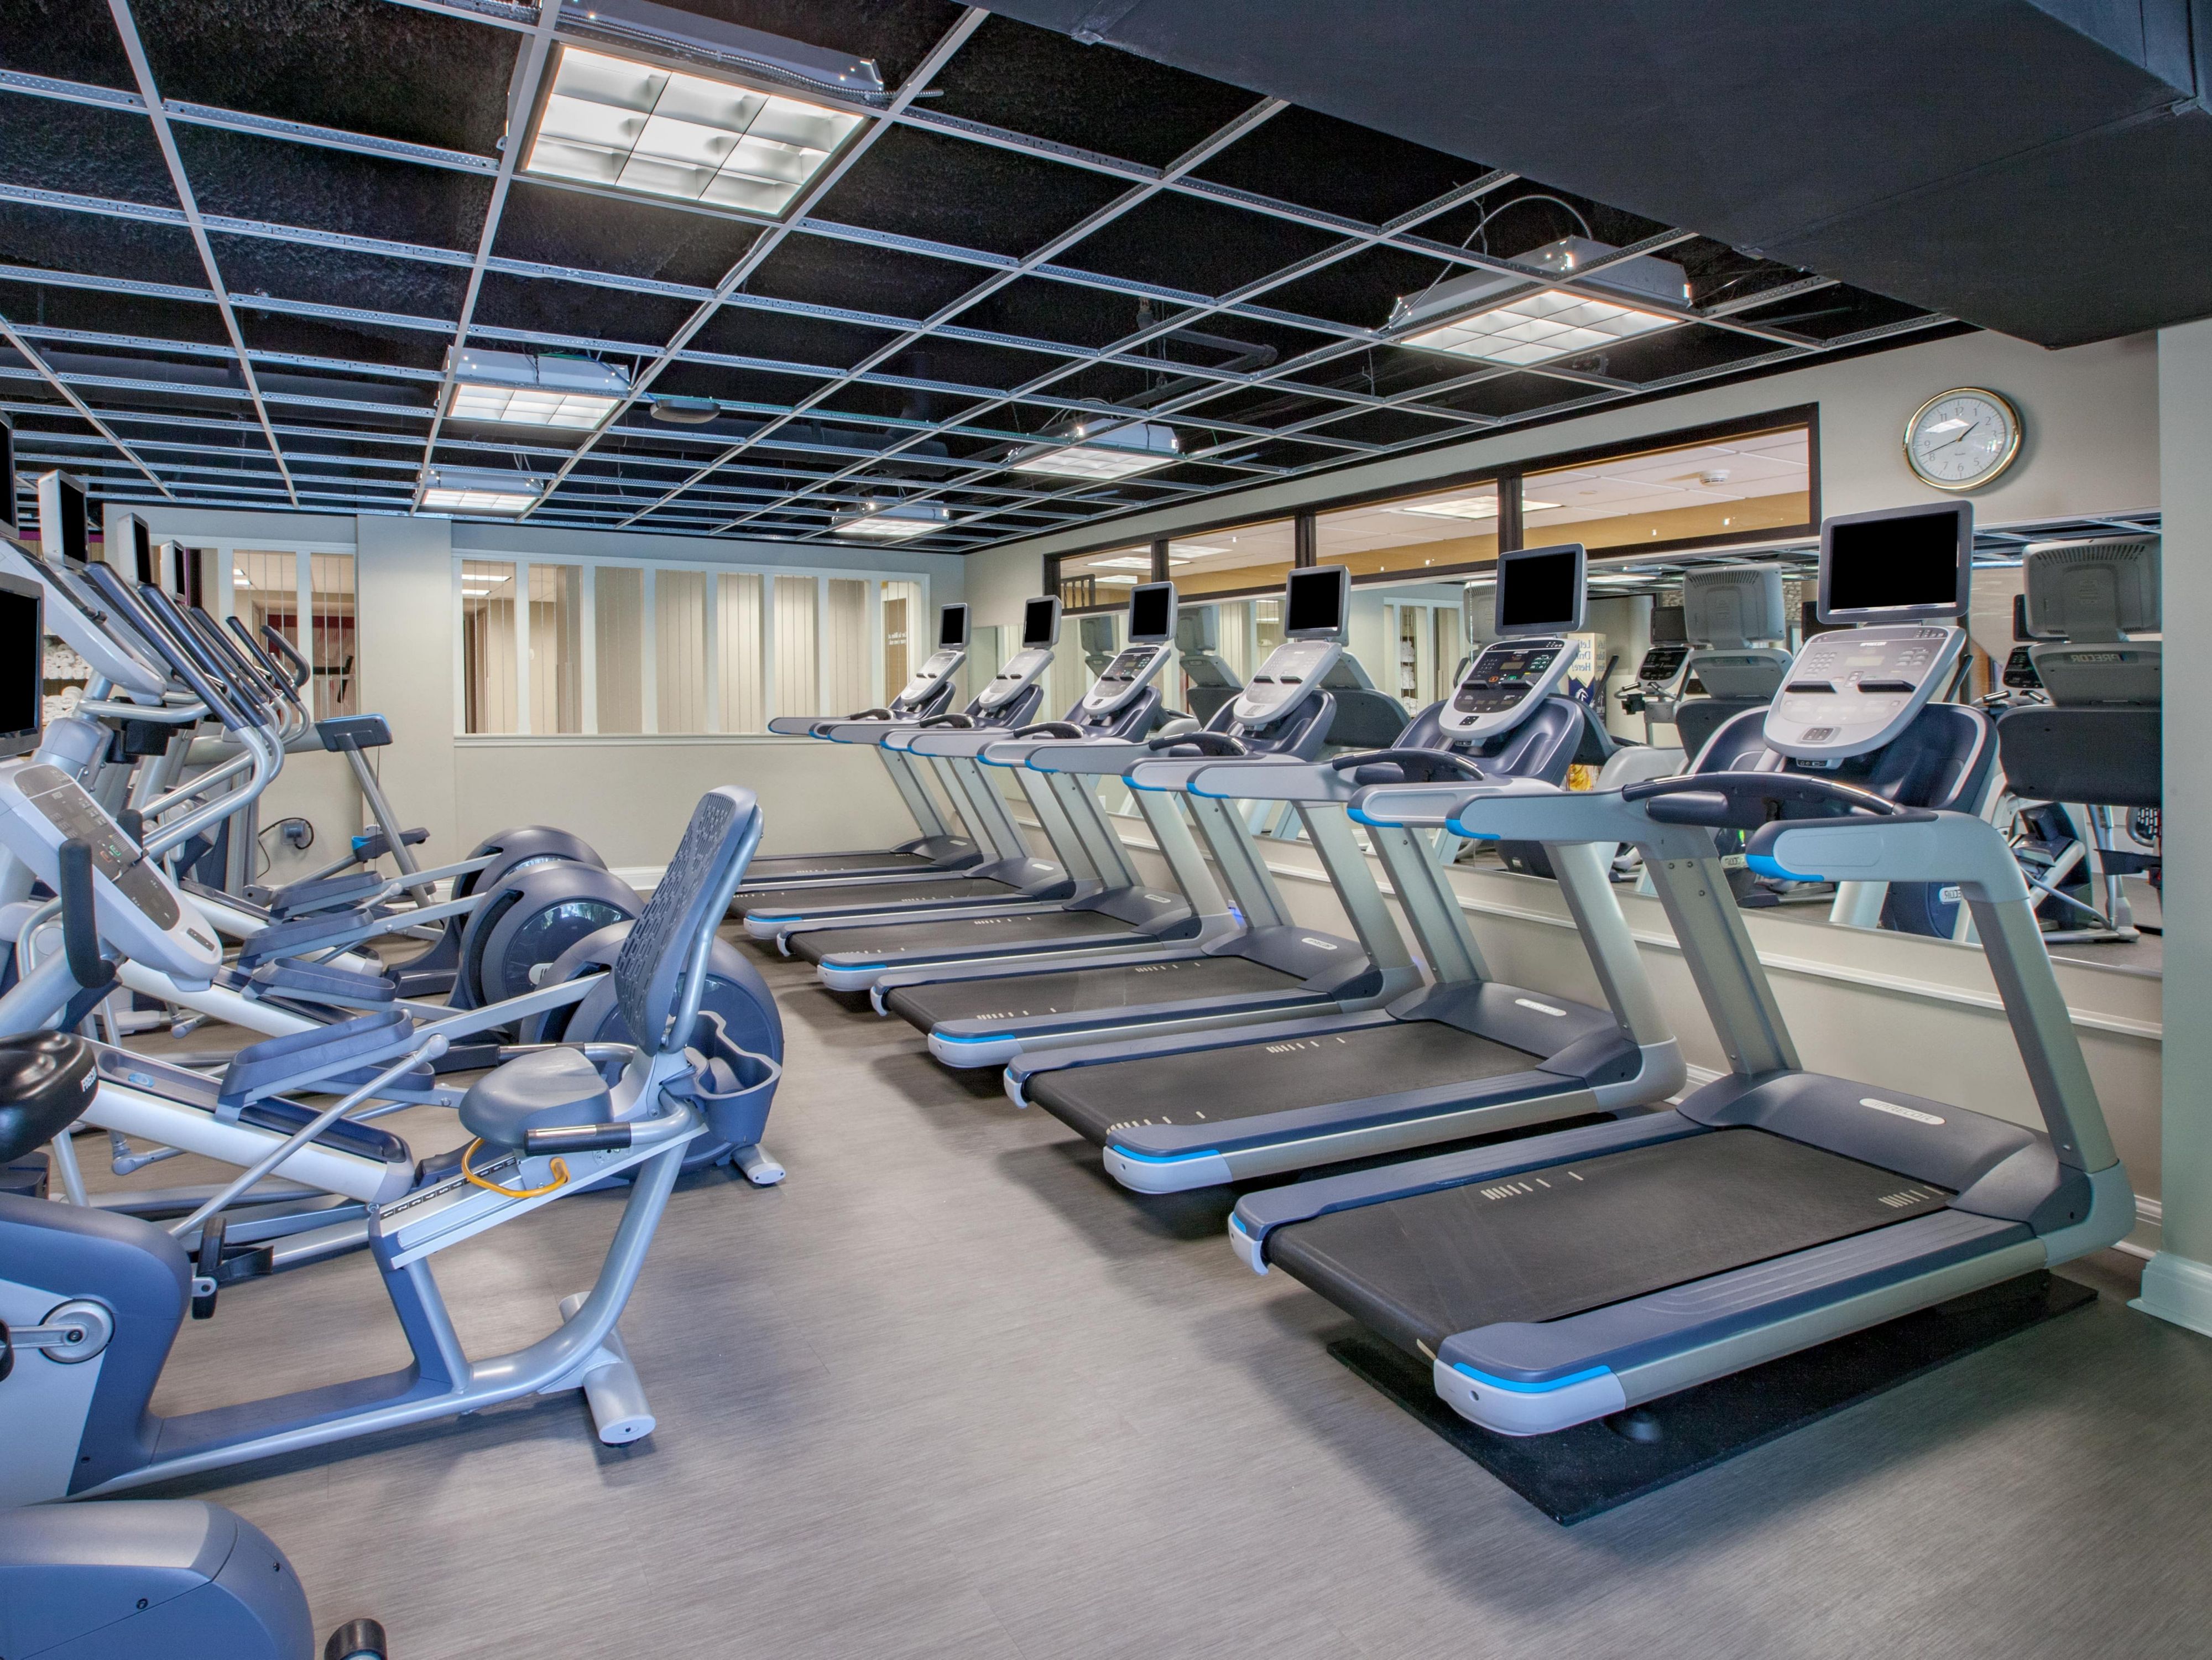 Enjoy an invigorating workout in our 24-hour fitness center with state-of-the-art equipment. Whether you prefer an early morning jog on the treadmill or a late-night session with free weights, our fitness center is here to accommodate your fitness needs around the clock.